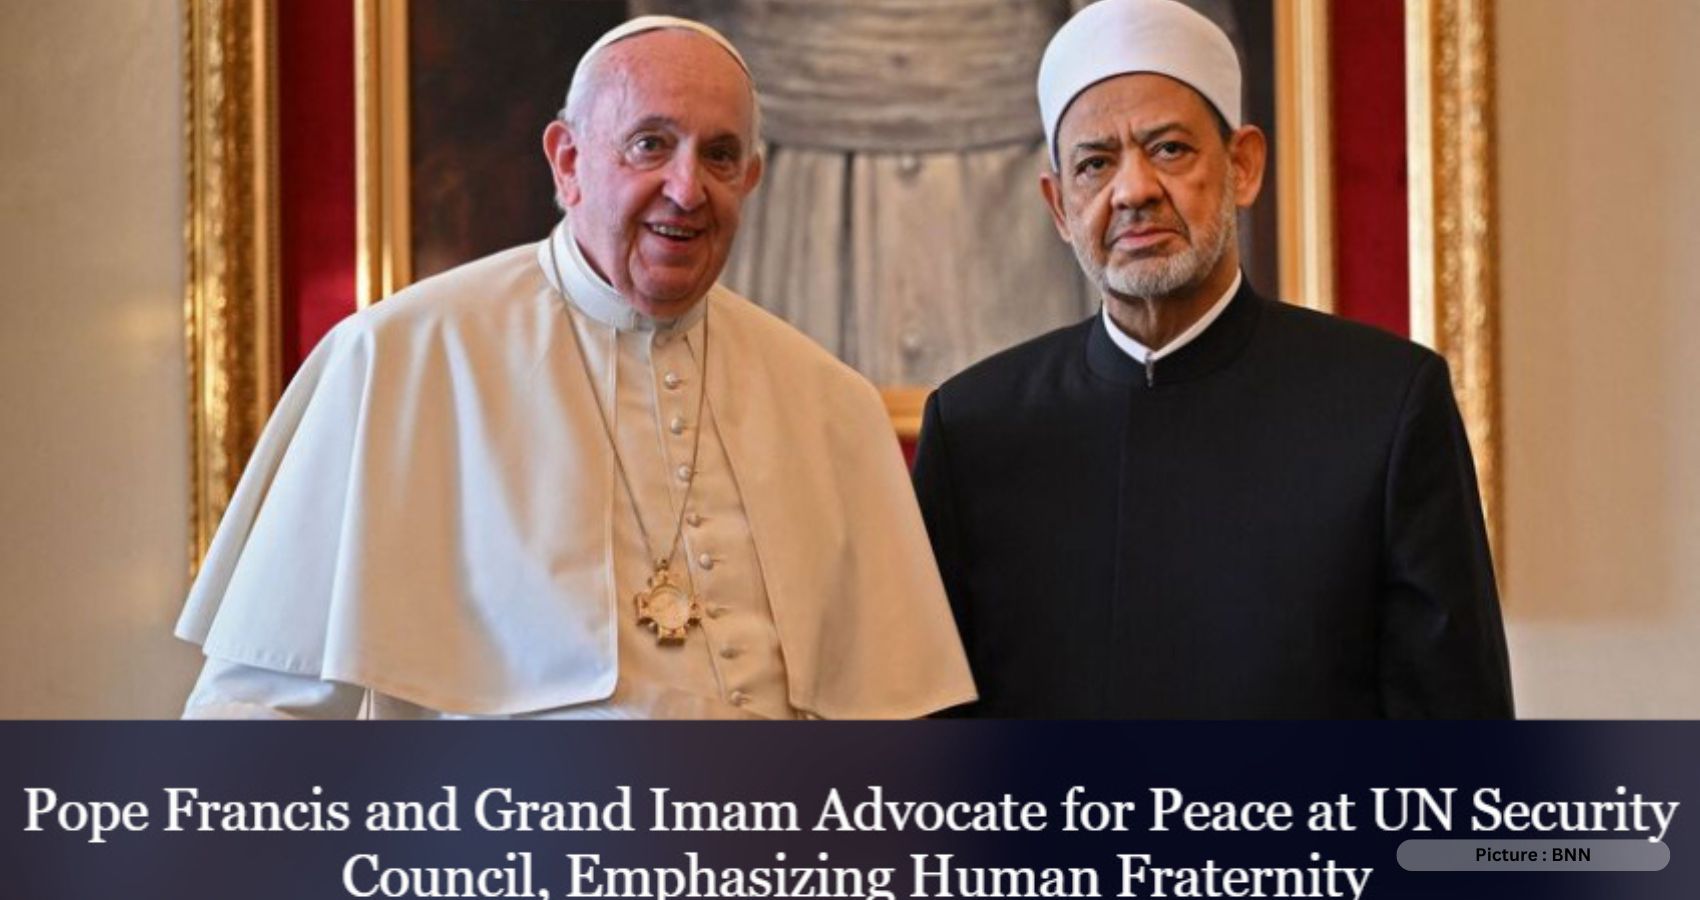 Pope Francis Joins With Imam In Making Calls For Peace Before UN Security Council Vote